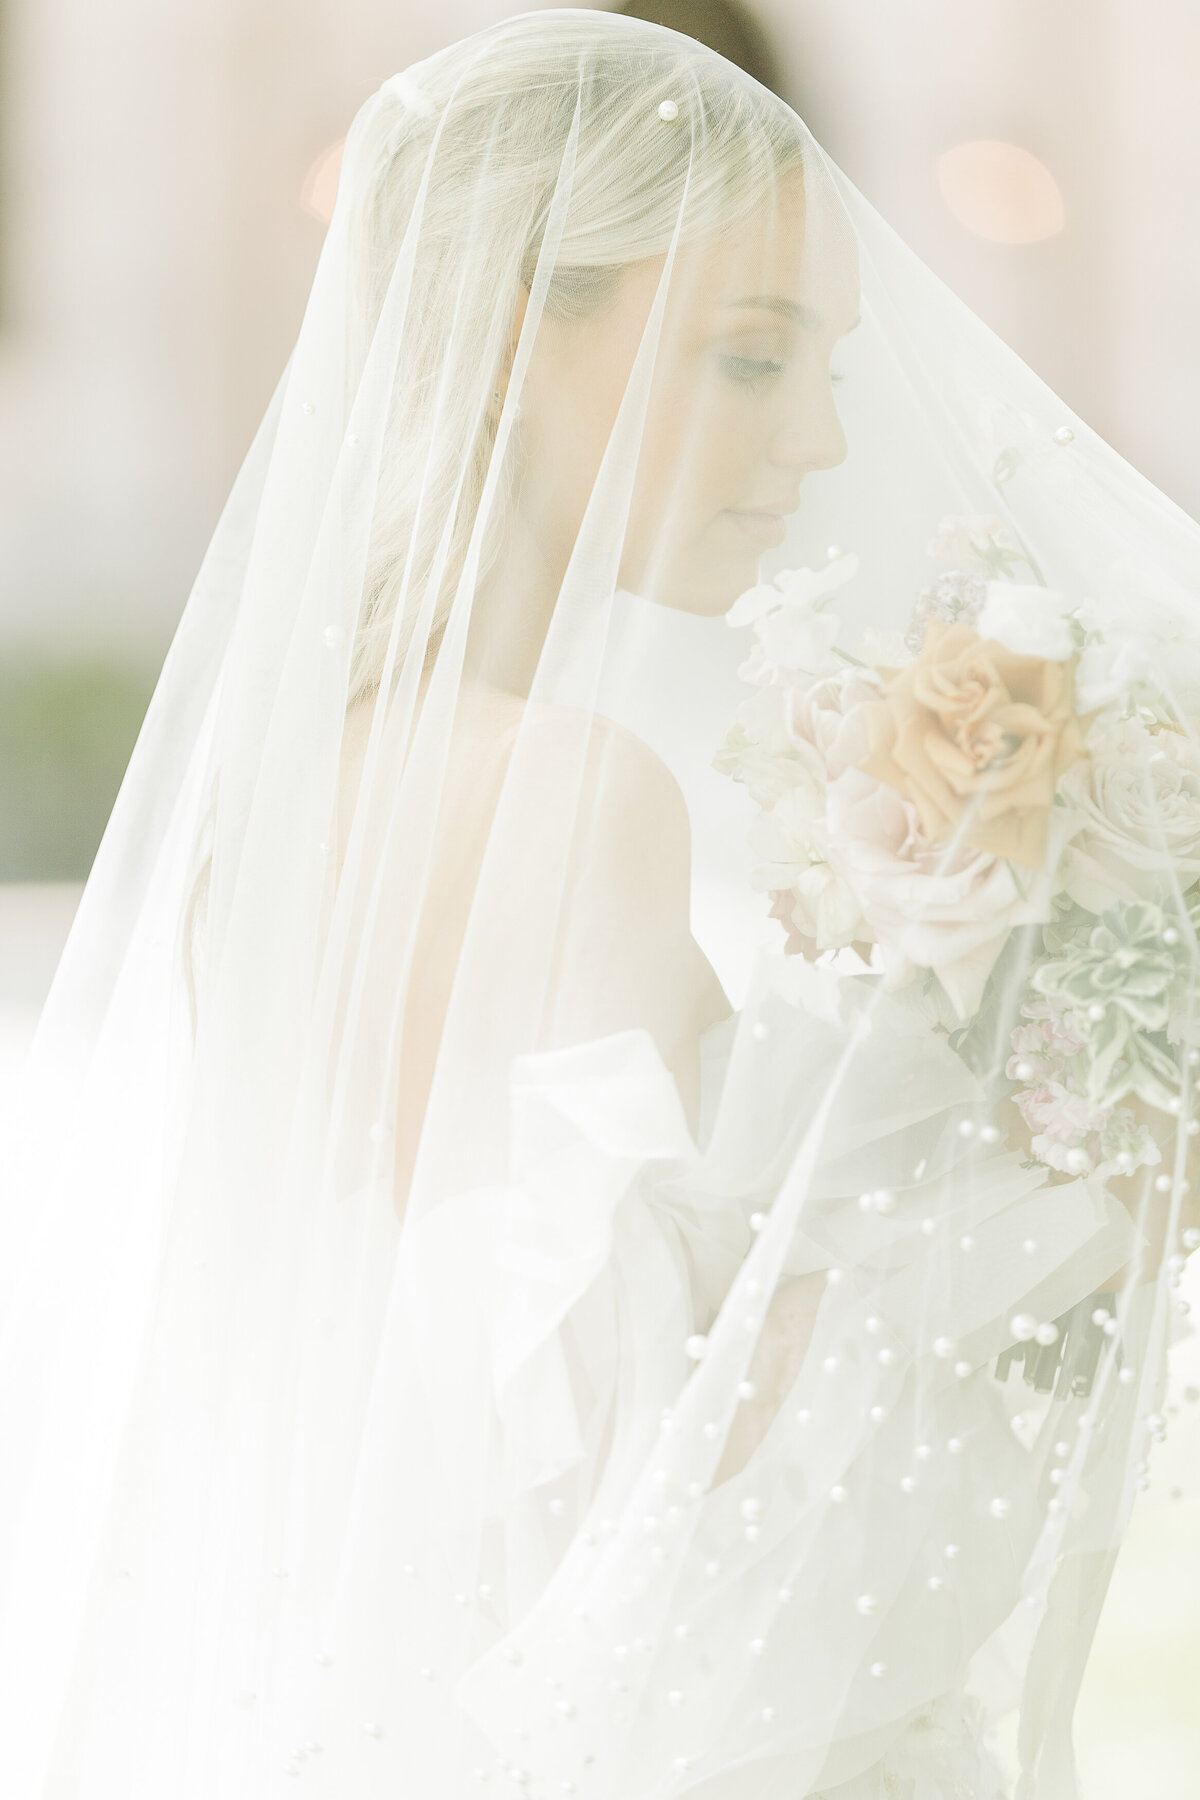 A bride stands with her veil pulled over her head. Her bouquet is under her veil. She is looking down at her flowers. Captured at golden hour for a soft, airy image. Captured by best North Shore Boston Wedding Photographer Lia Rose Weddings.